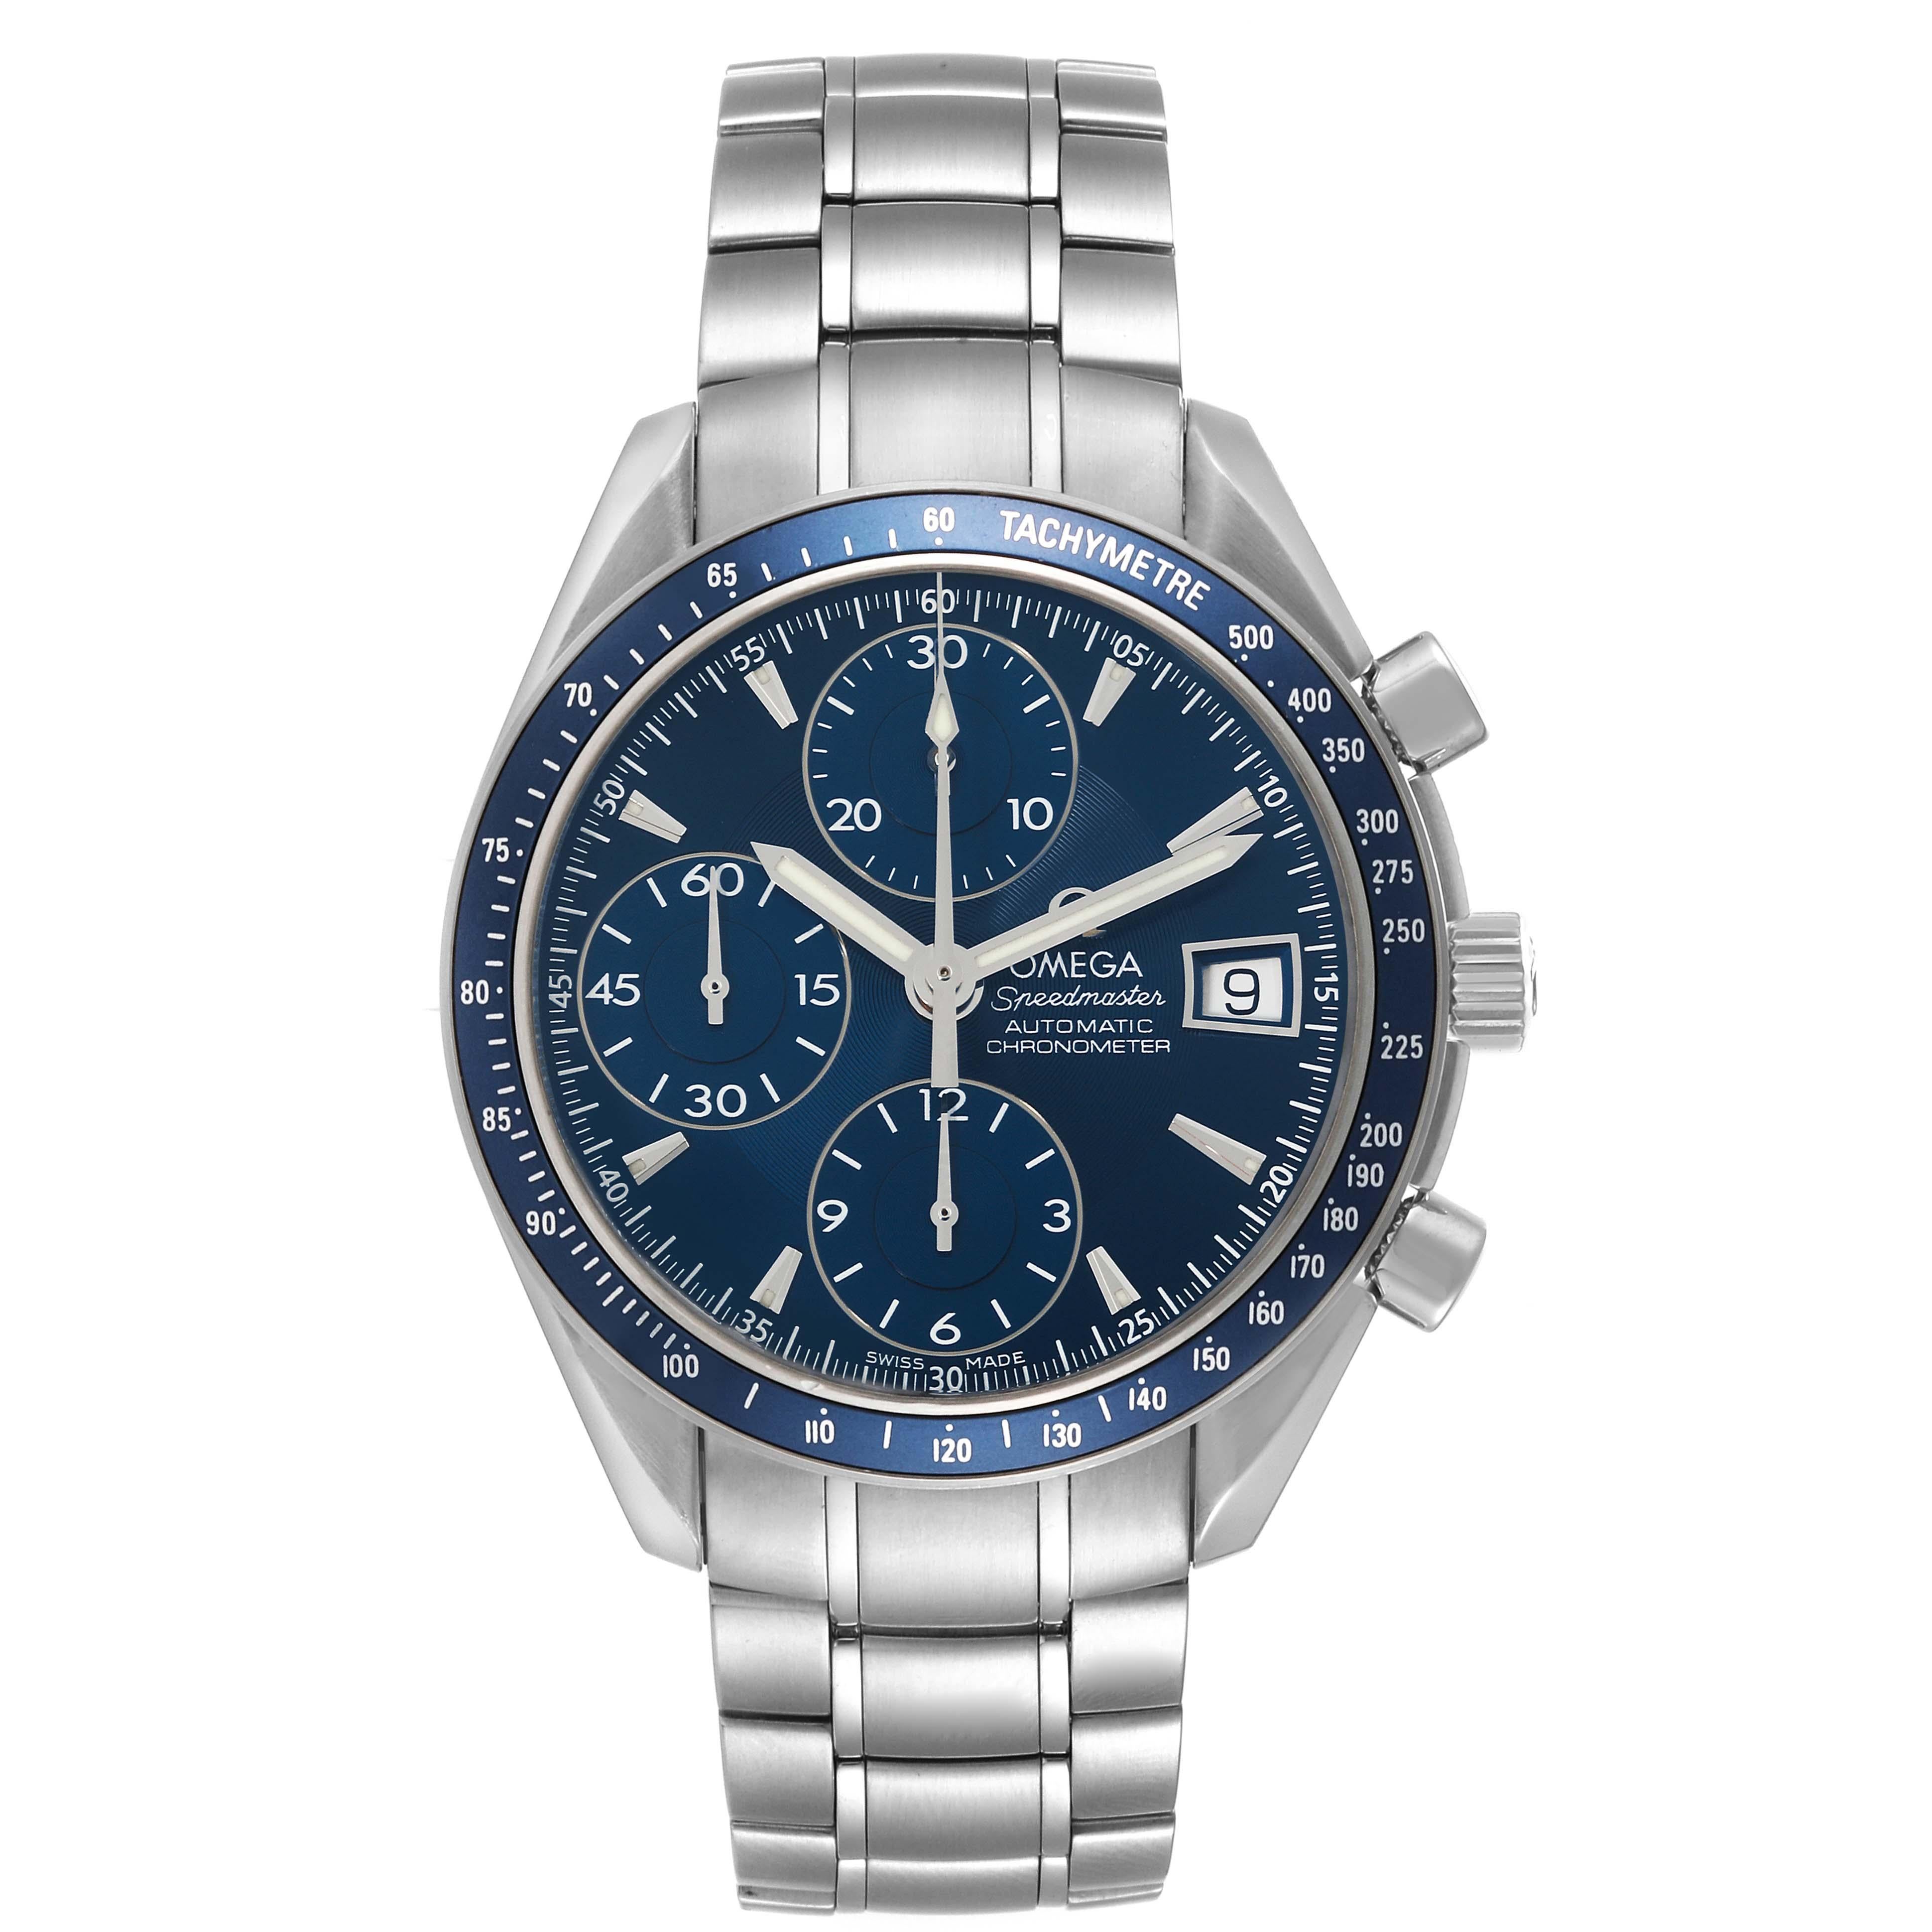 Omega Speedmaster Blue Dial Chronograph Steel Mens Watch 3212.80.00 Box Card. Automatic self-winding chronograph movement. Officially certified chronometer. Stainless steel round case 40.0 mm in diameter. Blue bezel with tachymetric scale.